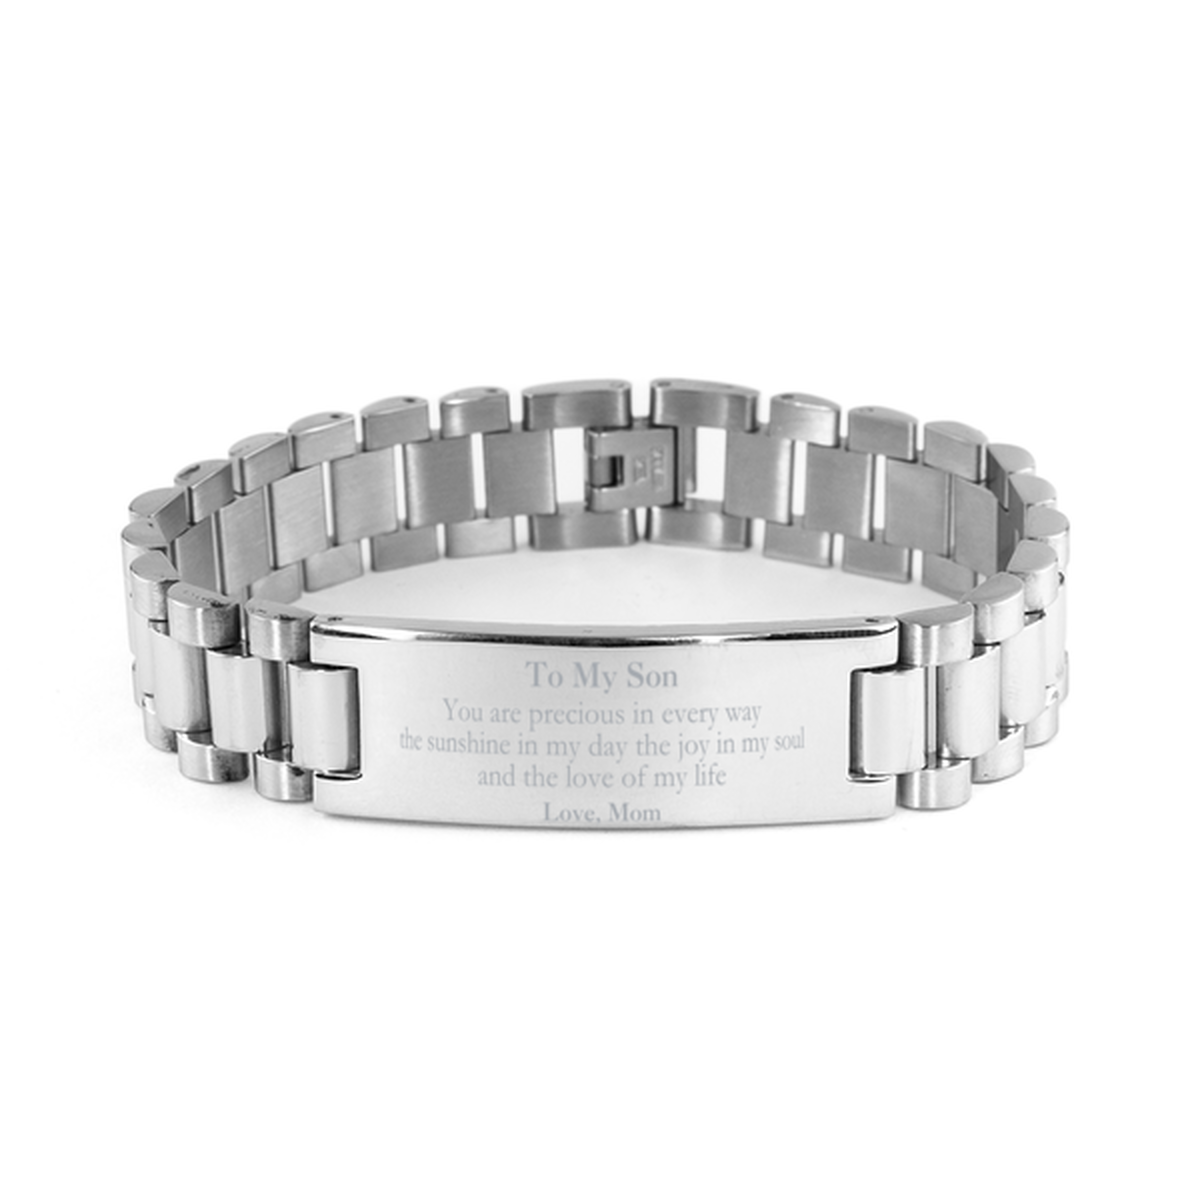 Graduation Gifts for Son Ladder Stainless Steel Bracelet Present from Mom, Christmas Son Birthday Gifts Son You are precious in every way the sunshine in my day. Love, Mom